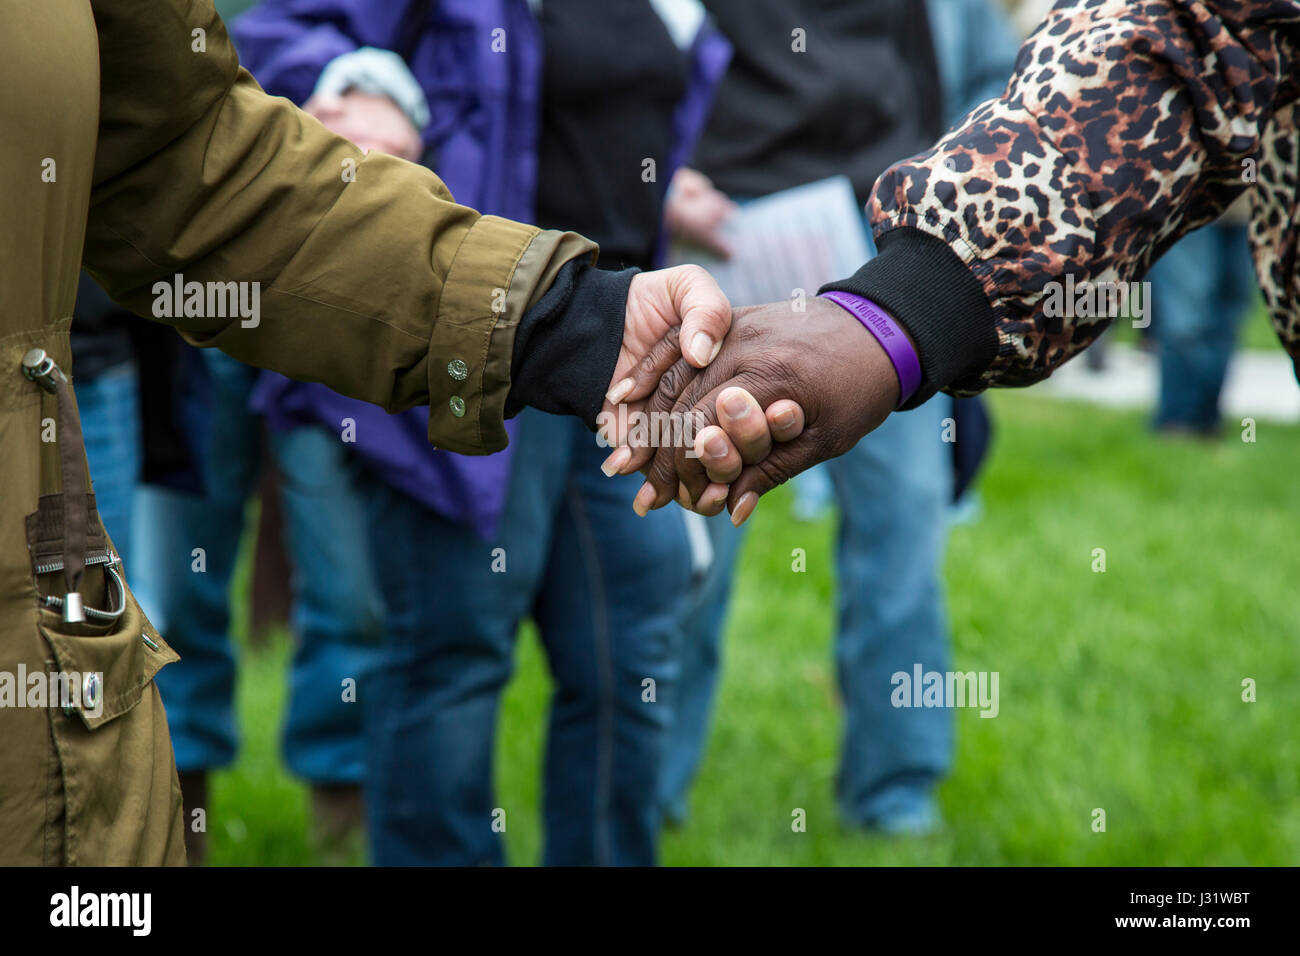 Detroit, Michigan, USA. 1st May, 2017. Hundreds joined hands in prayer during a Rally for Immigrant Families. Credit: Jim West/Alamy Live News Stock Photo